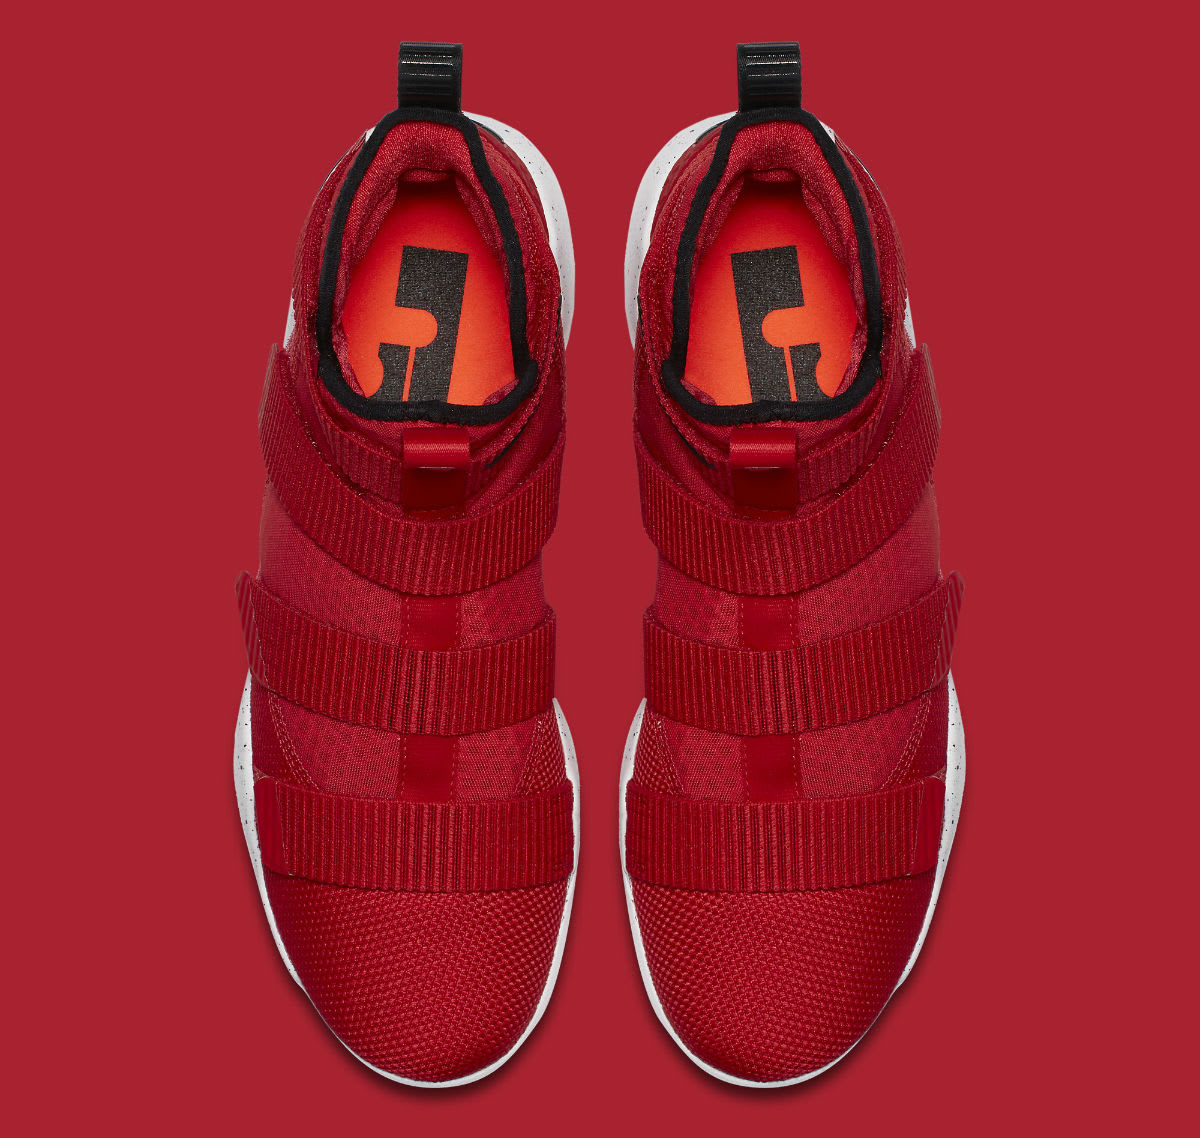 Nike LeBron Soldier 11 University Red Release Date Top 897644-601